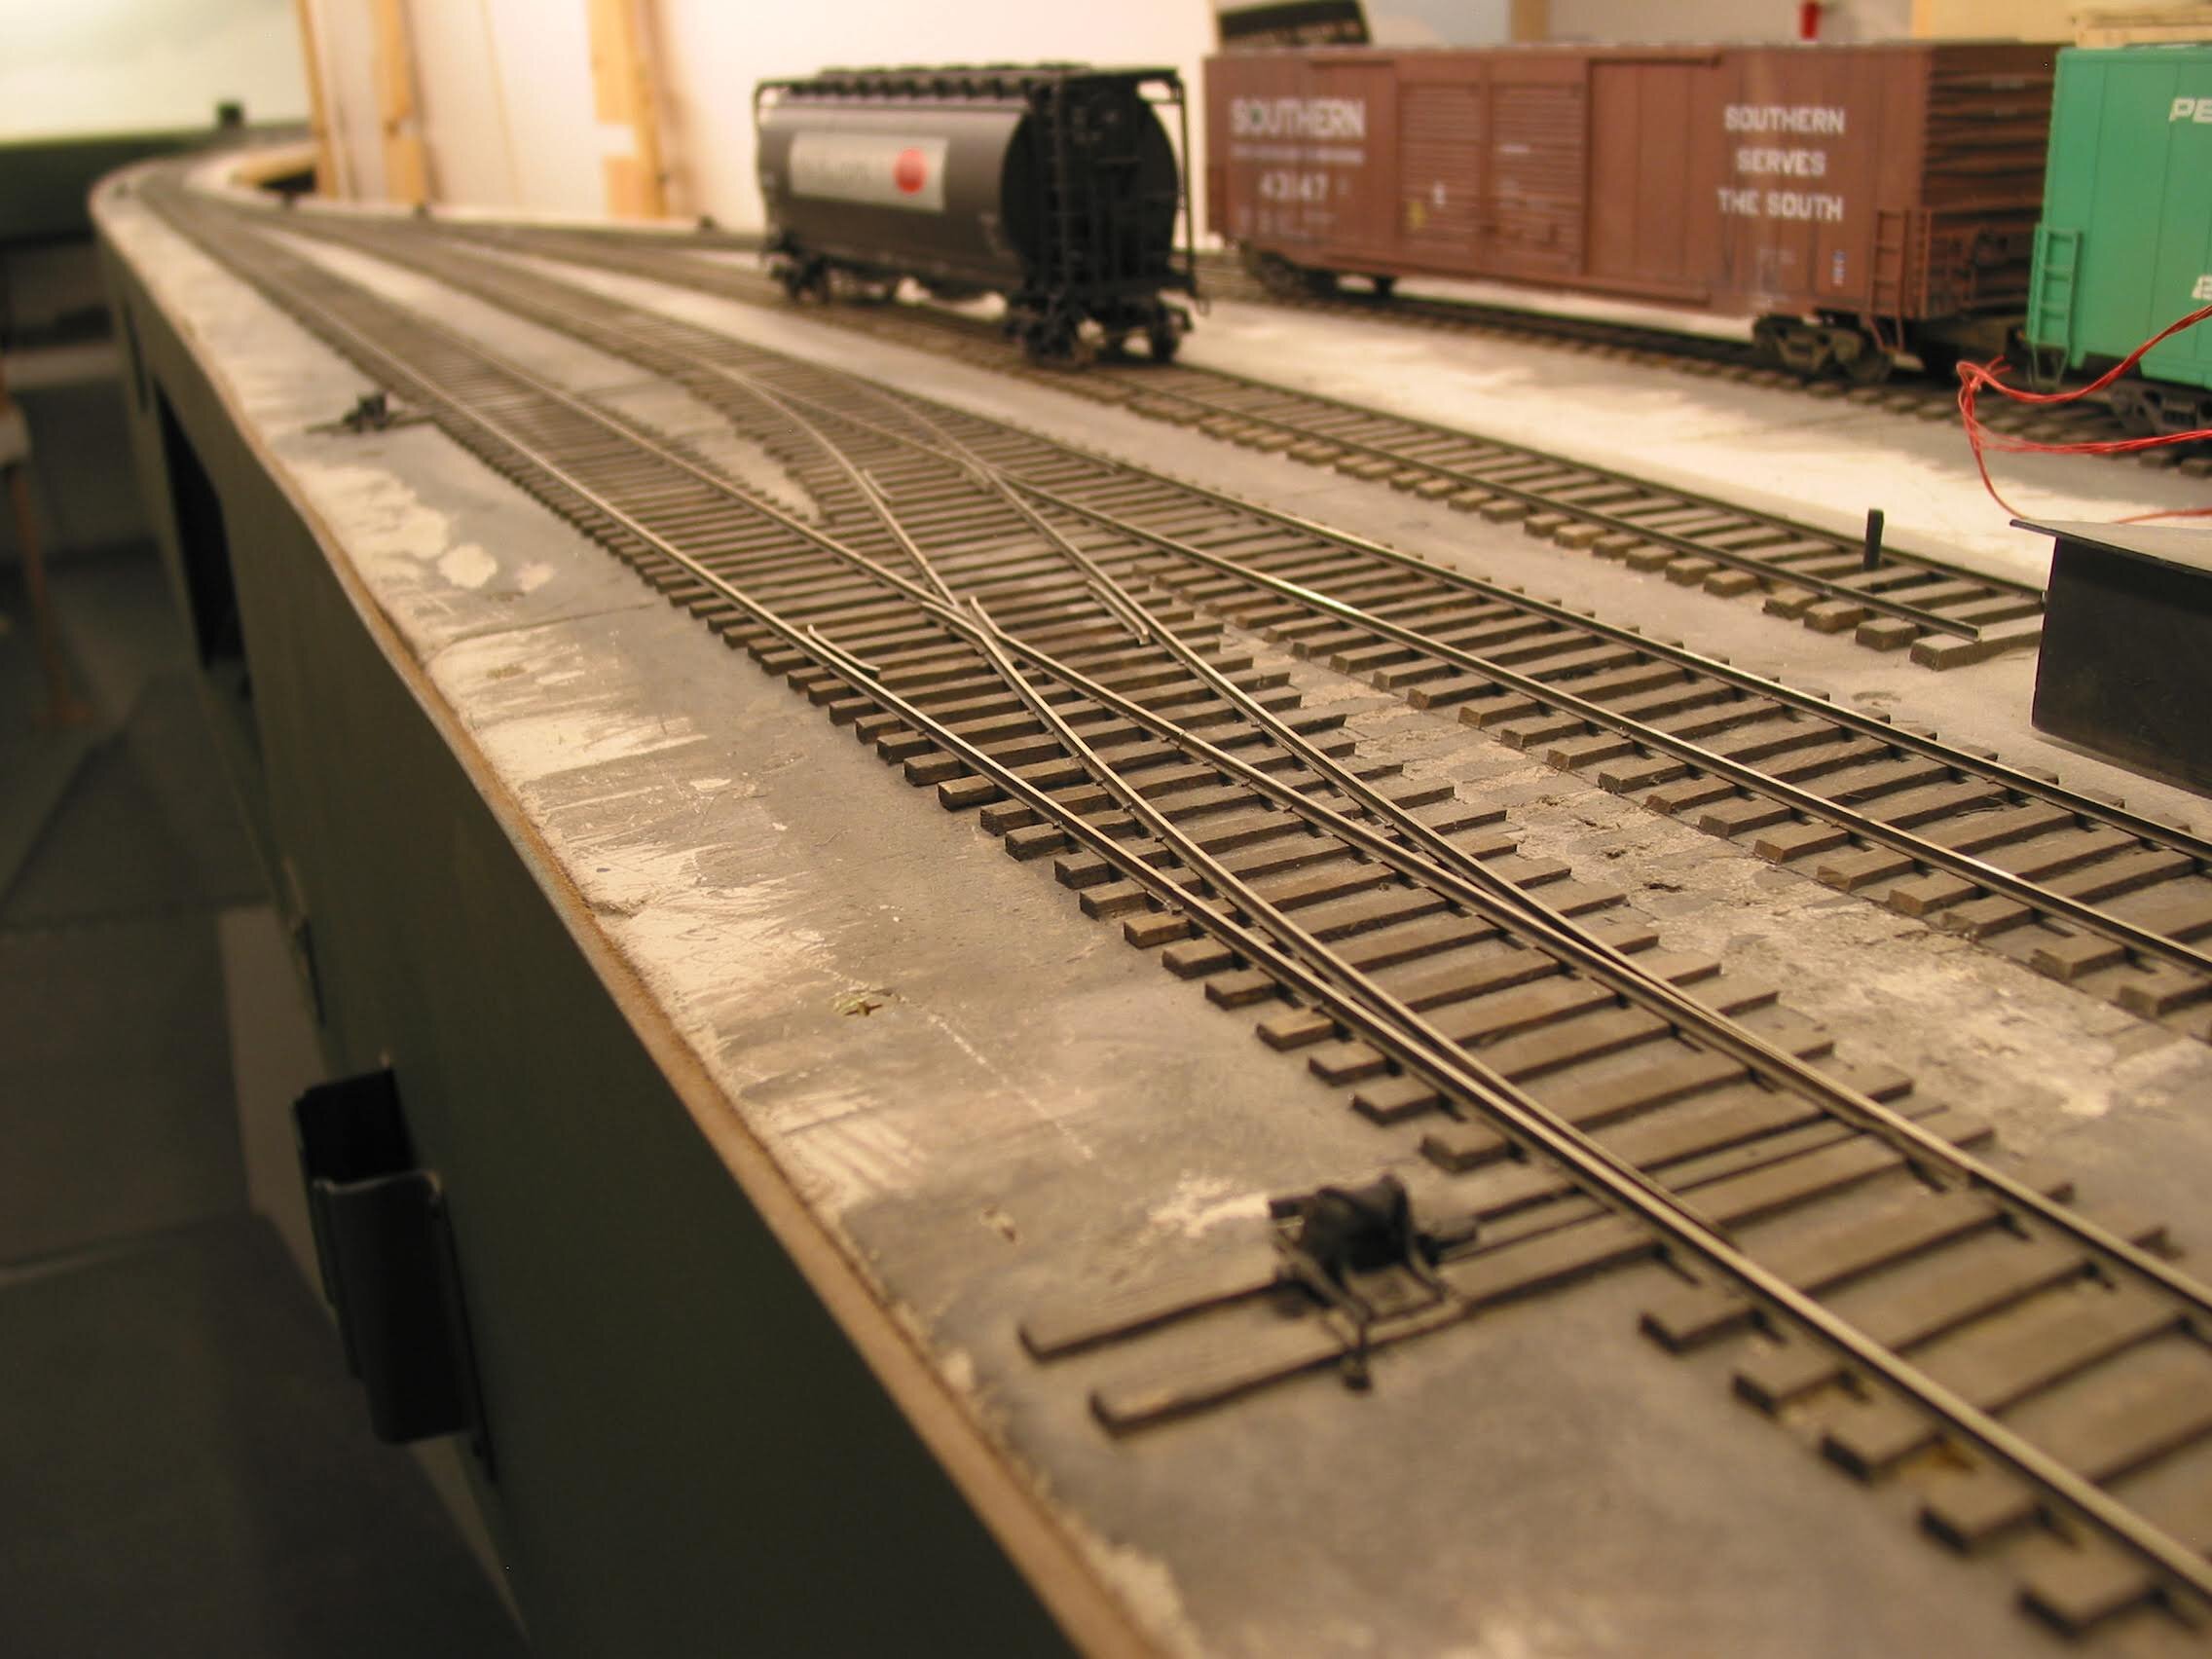  In Fillmore Heights Industrial the trackage is shallow, and high (intentionally). I chose to use HO scale Caboose ground throws with a crank mechanism to an underside two-leaf micro switch. Throwing the turnout changes frog polarity and also lights 